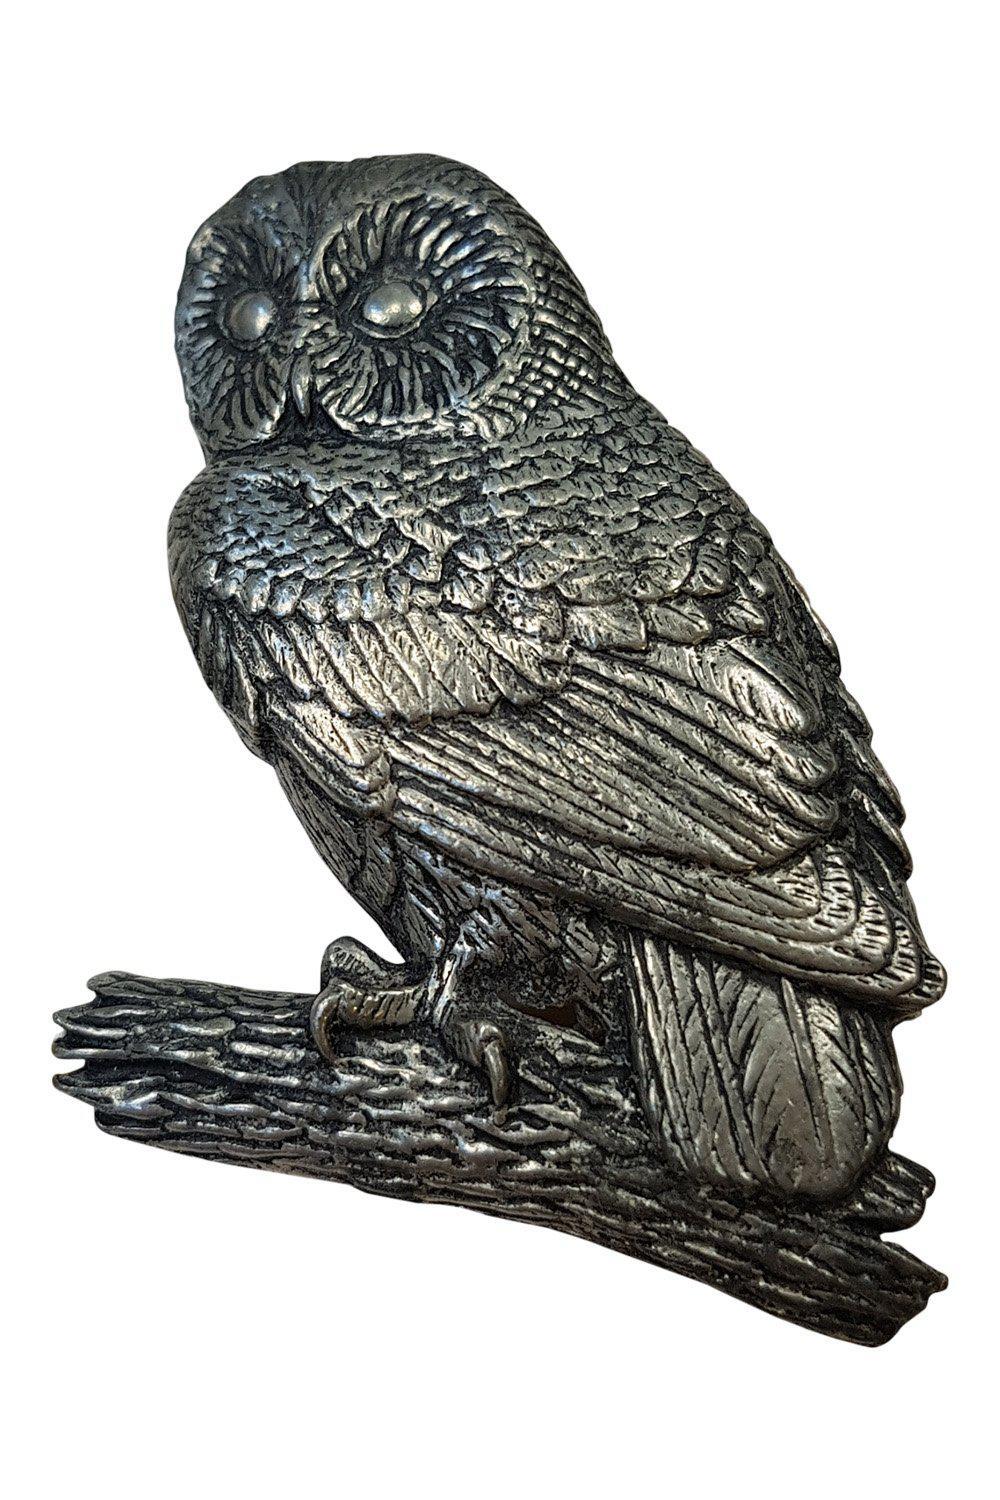 OWL BROOCH Vintage Pewter Tawny Owl on Matching Pewter Branch-Unbranded-The Freperie